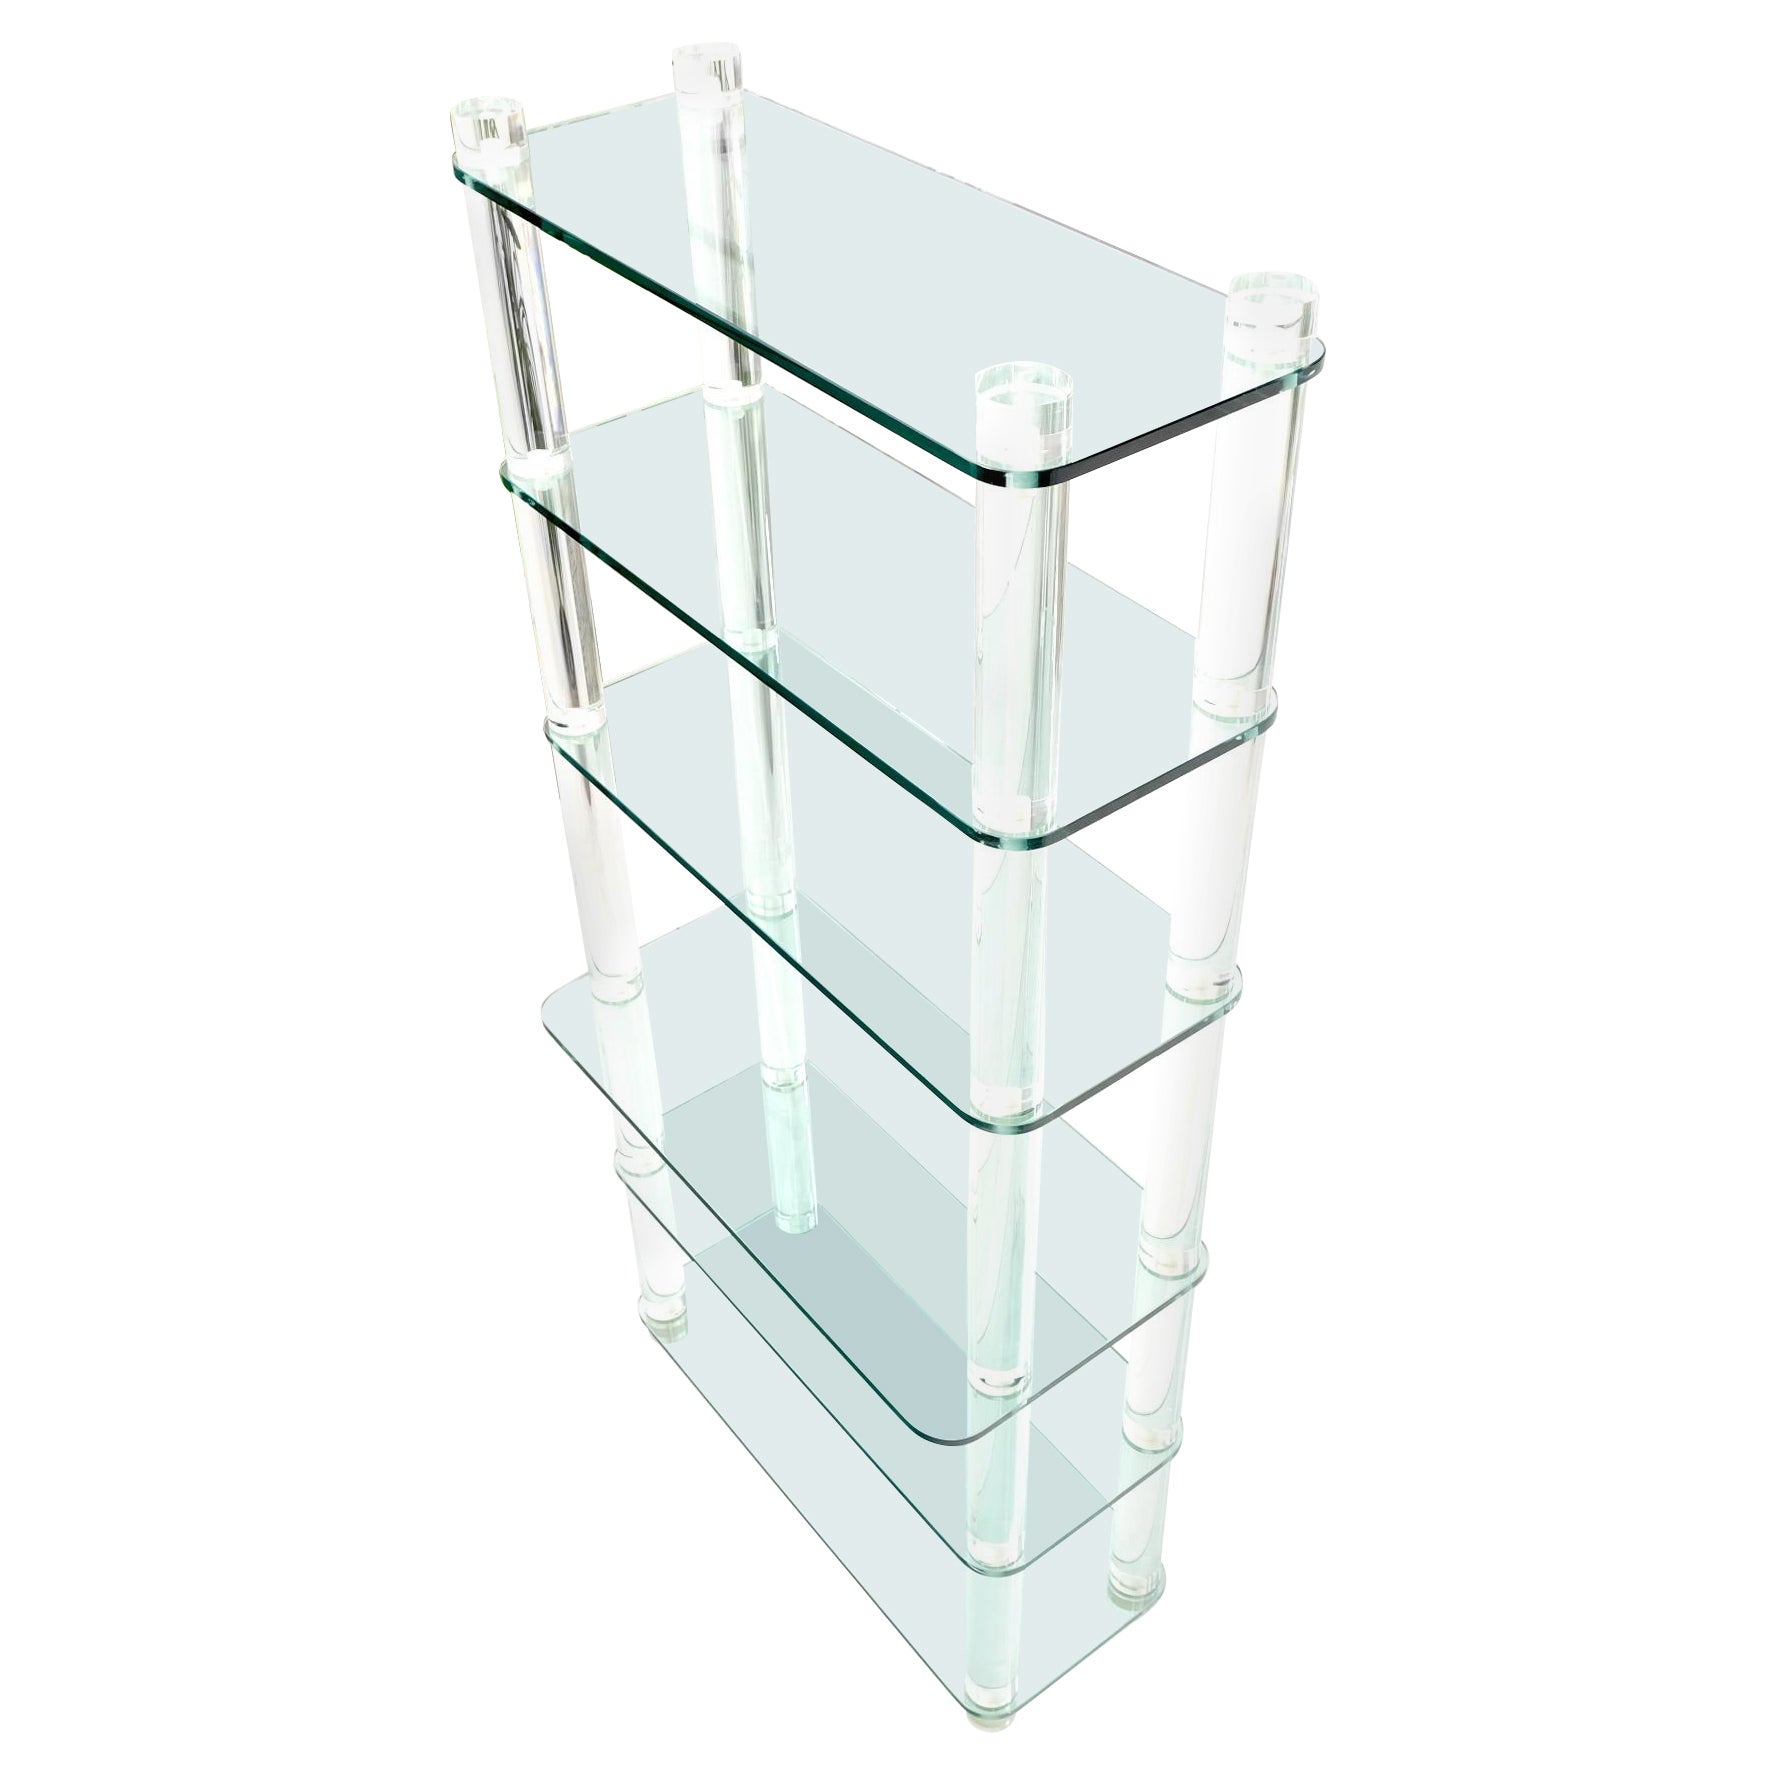 Thick Lucite Frame 6 Tier Mid Century Modern Etagere Shelving For Sale